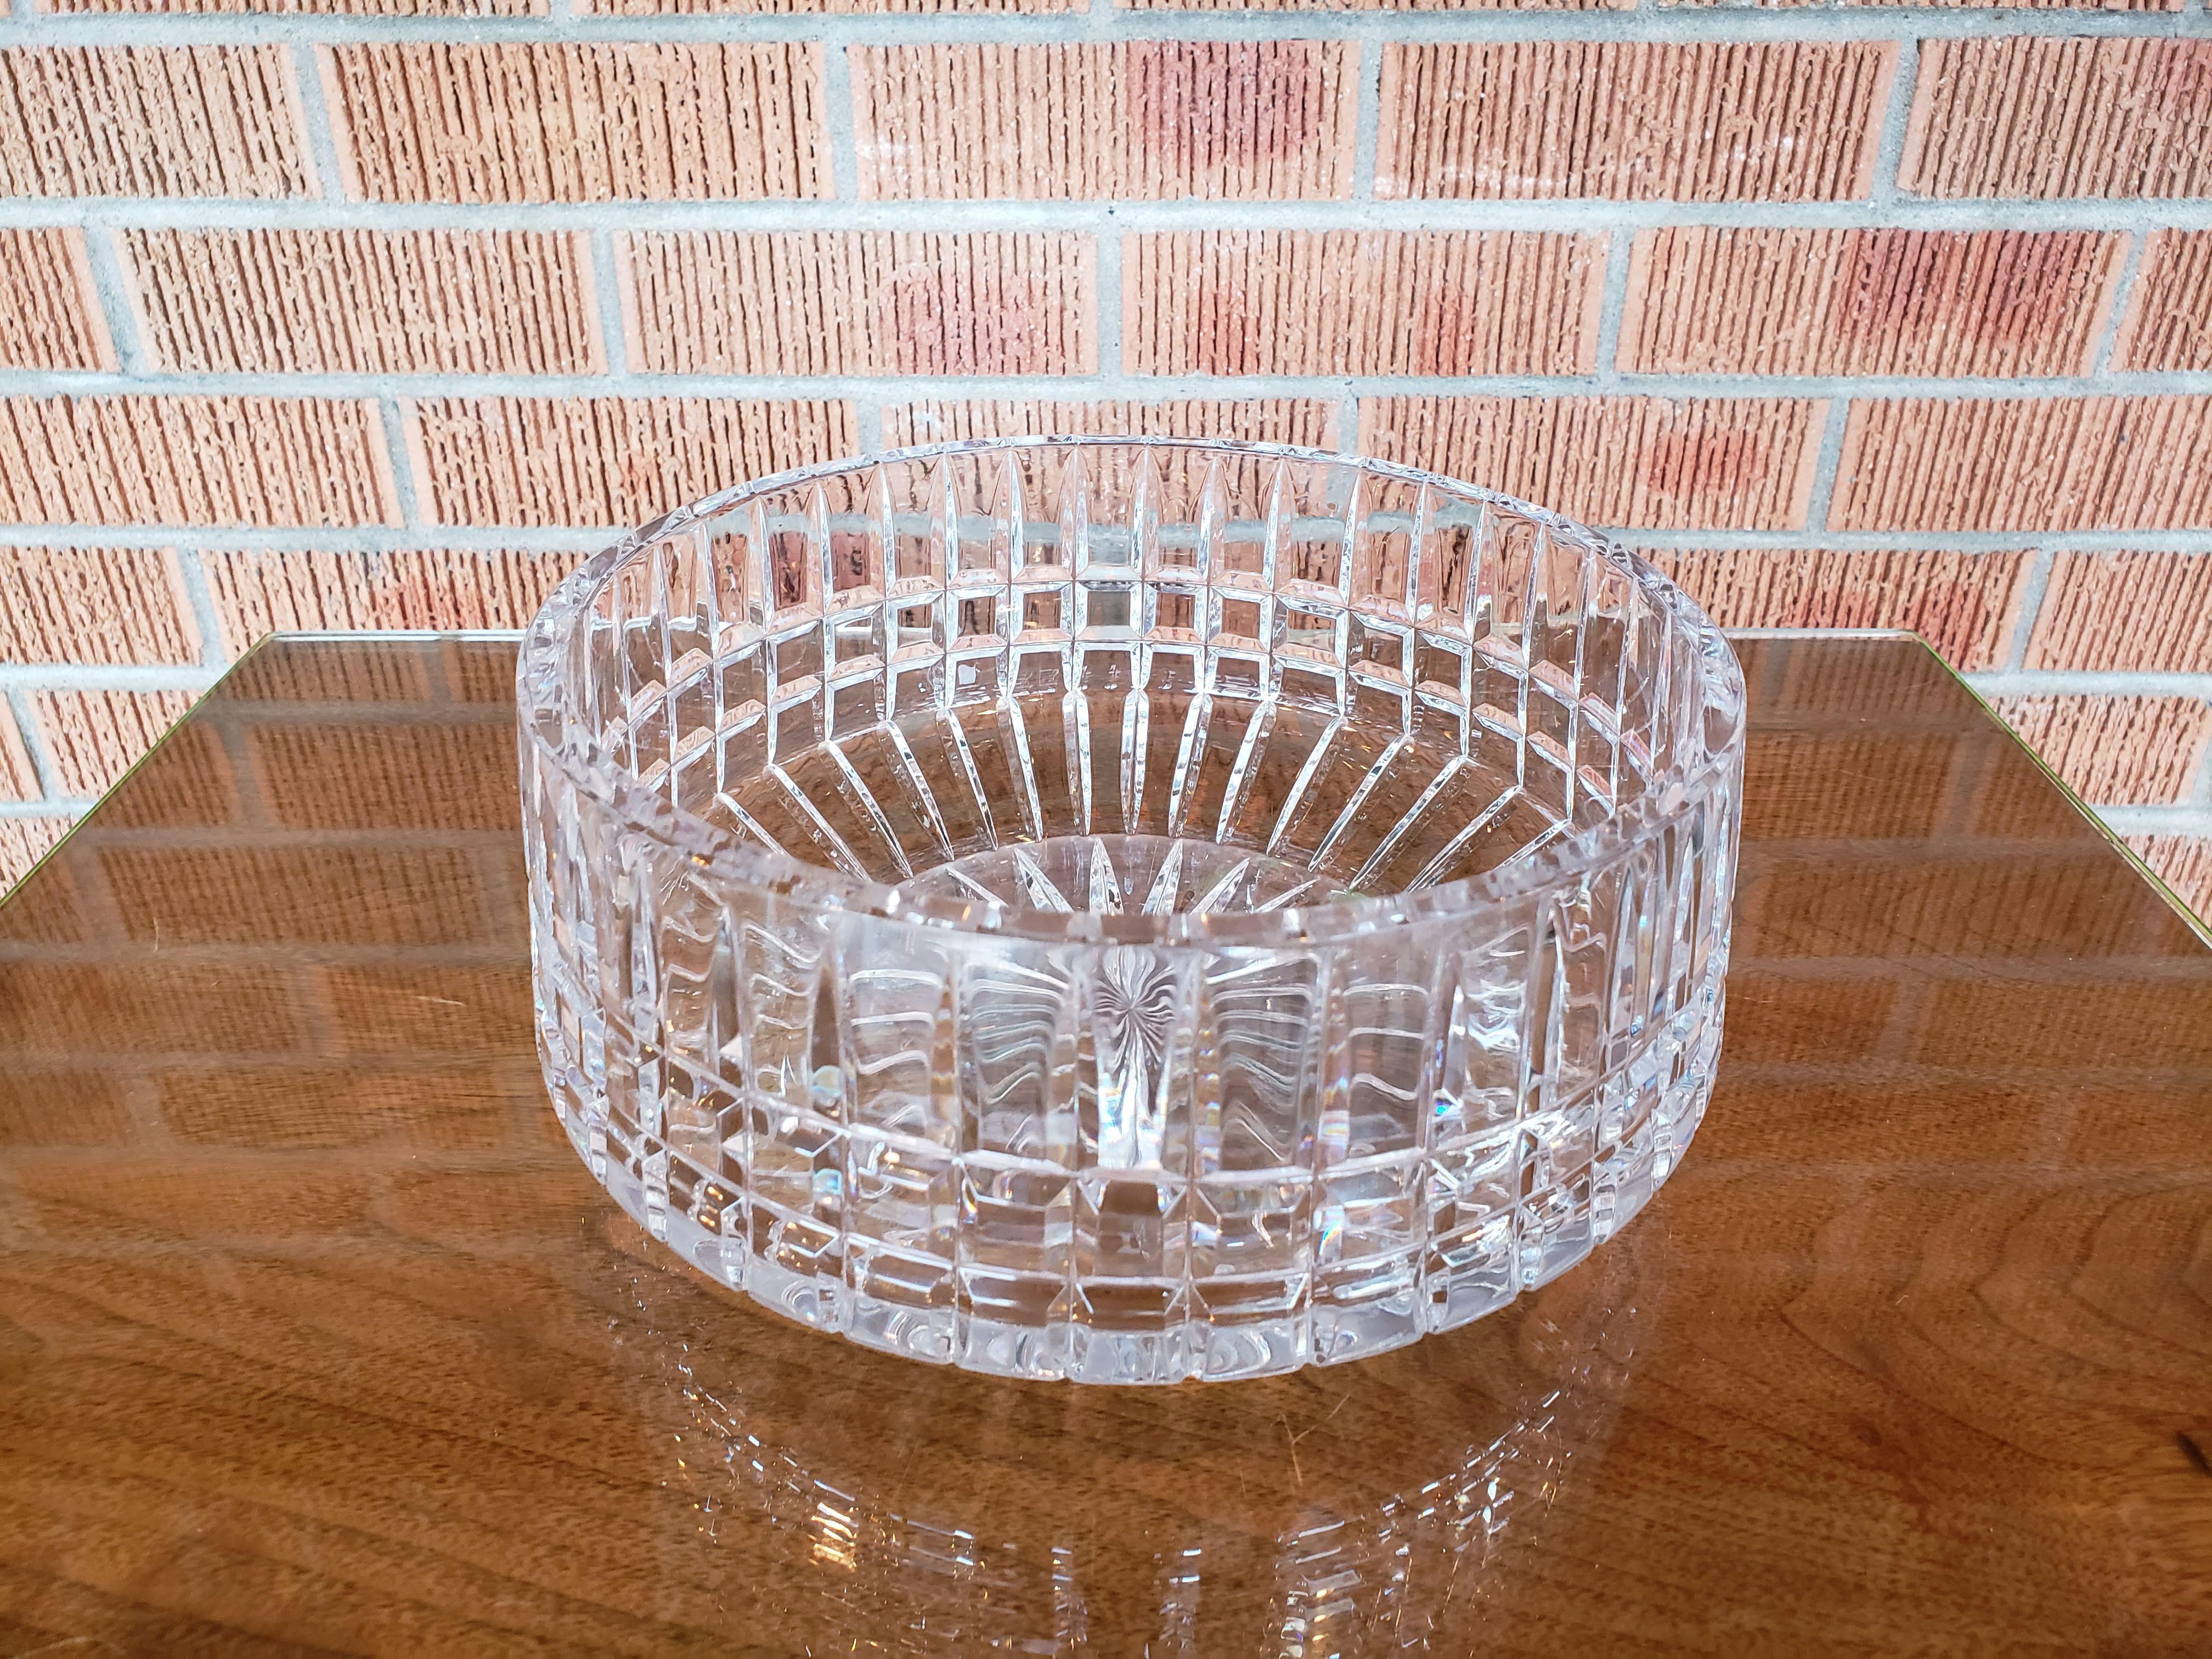 Mid-Century Modern Czech Republic crystal bowl by Ceska. Would be great as a glass centerpiece or used as a fruit bowl.